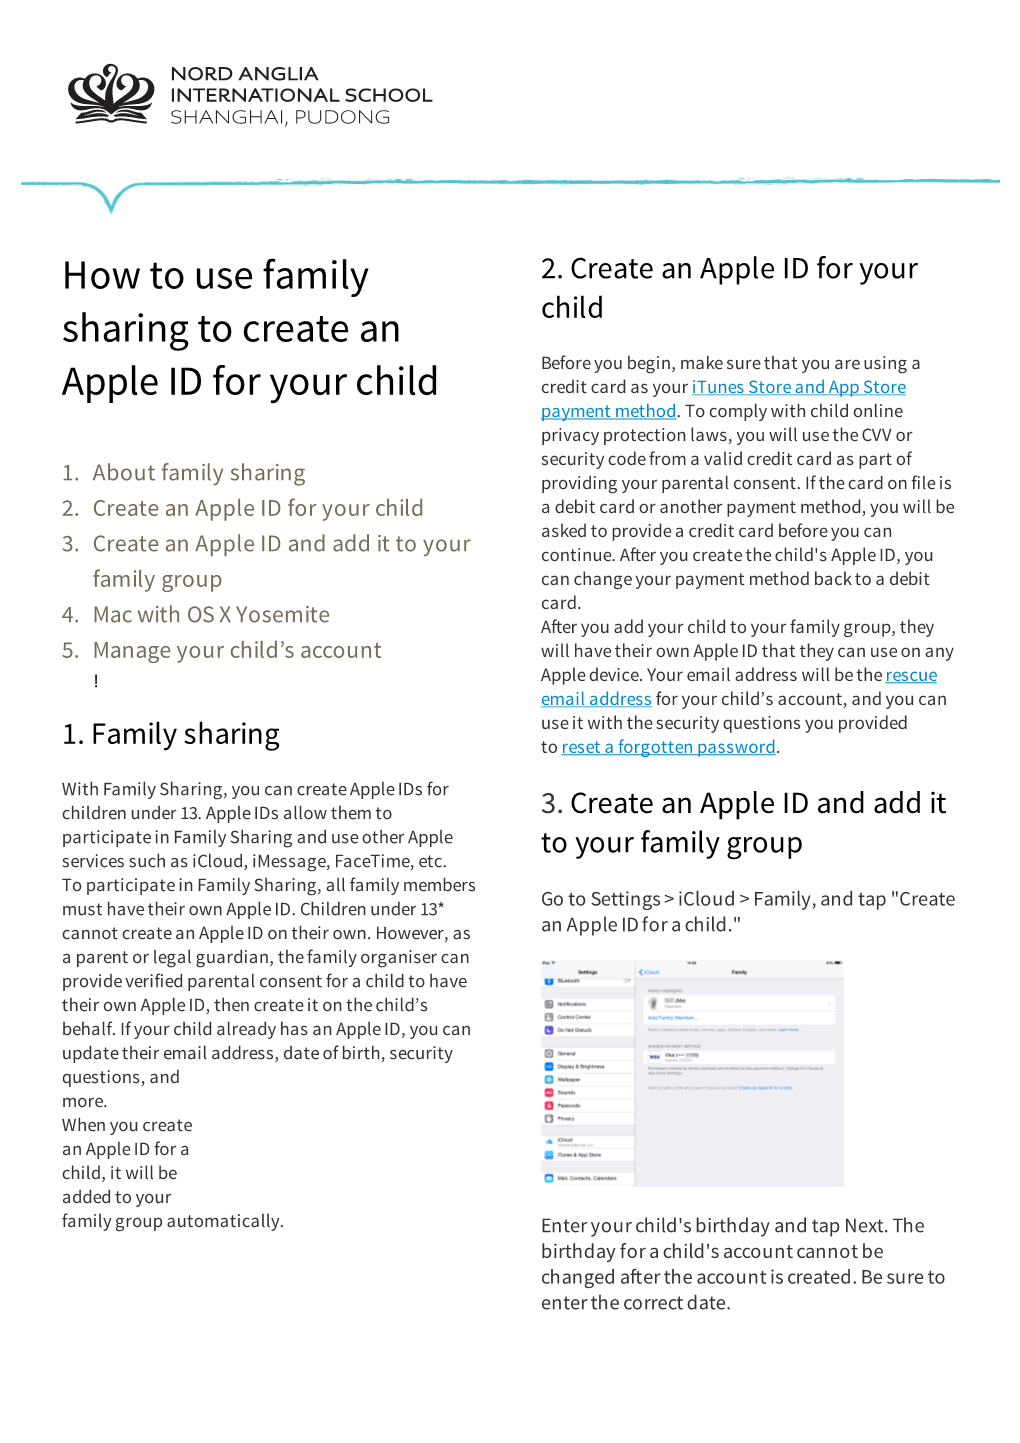 How to Use Family Sharing to Create an Apple ID for Your Child